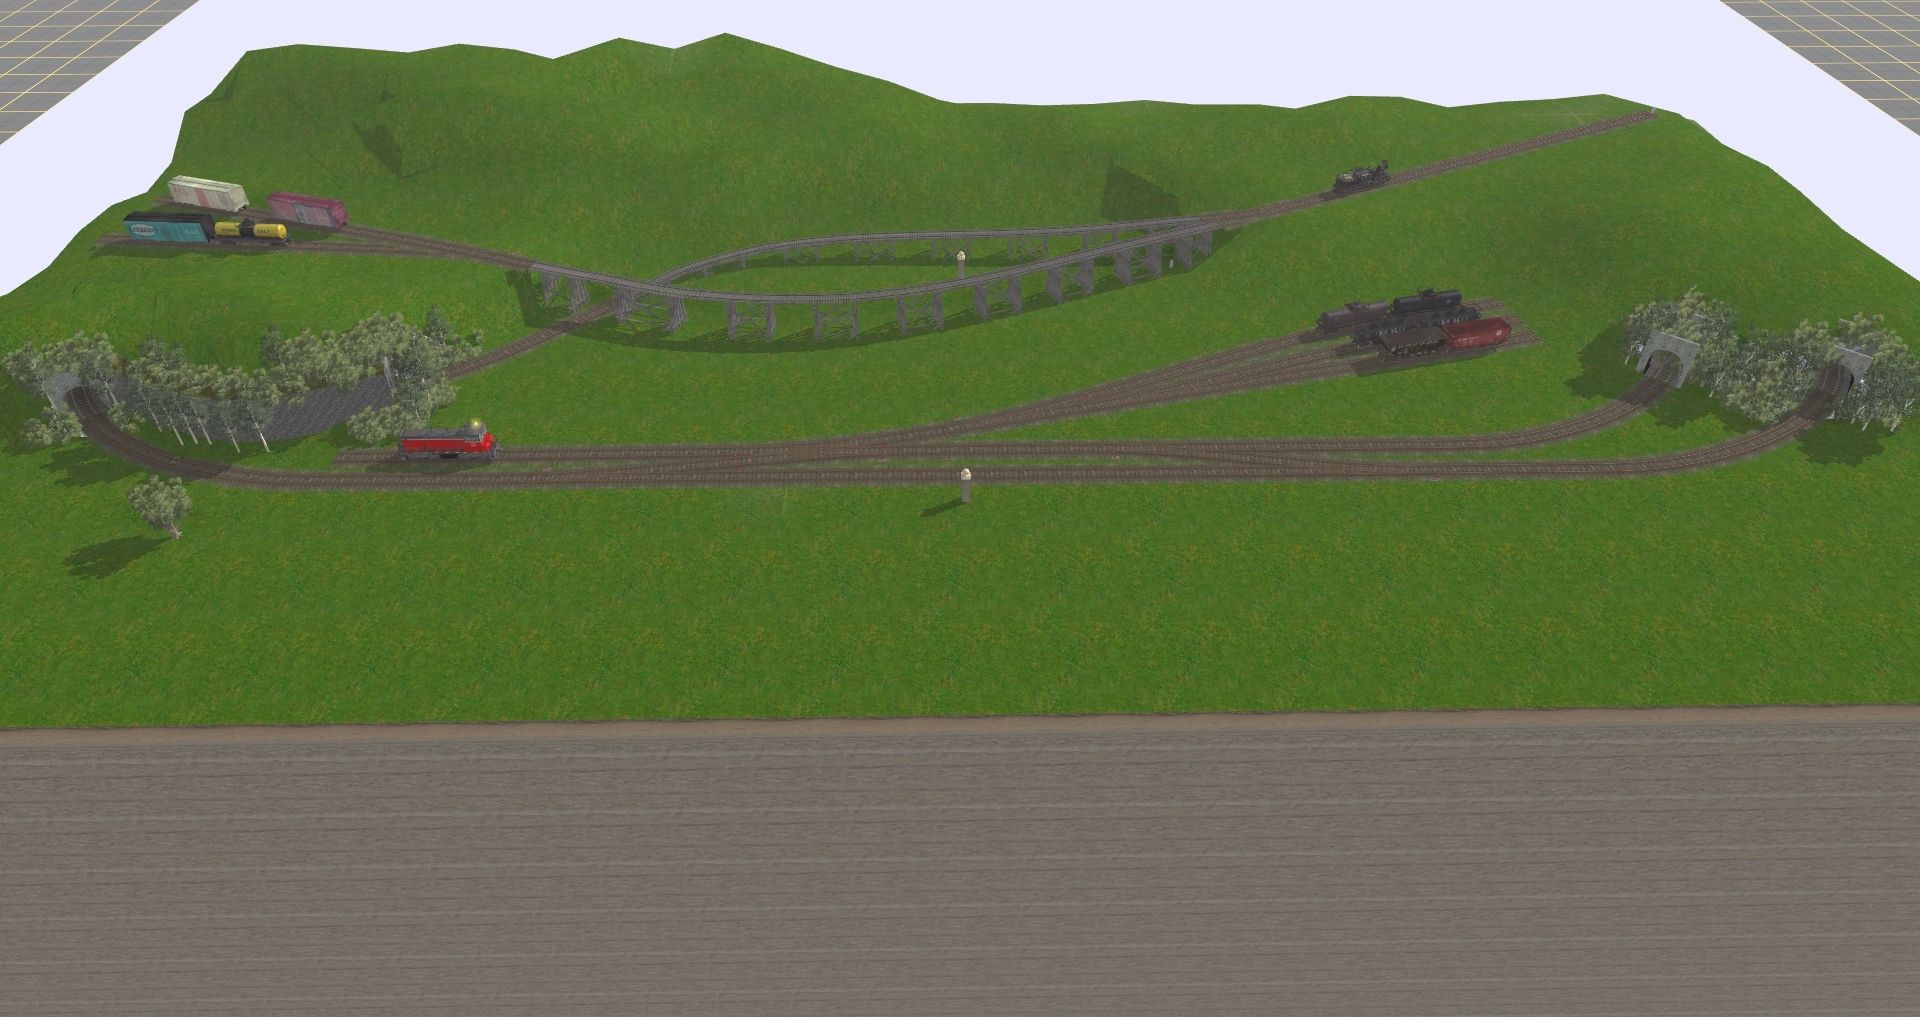 My-first-Trainz-Layout-based-on-Z-scale-layout-I%27m-currenlty-building..jpg